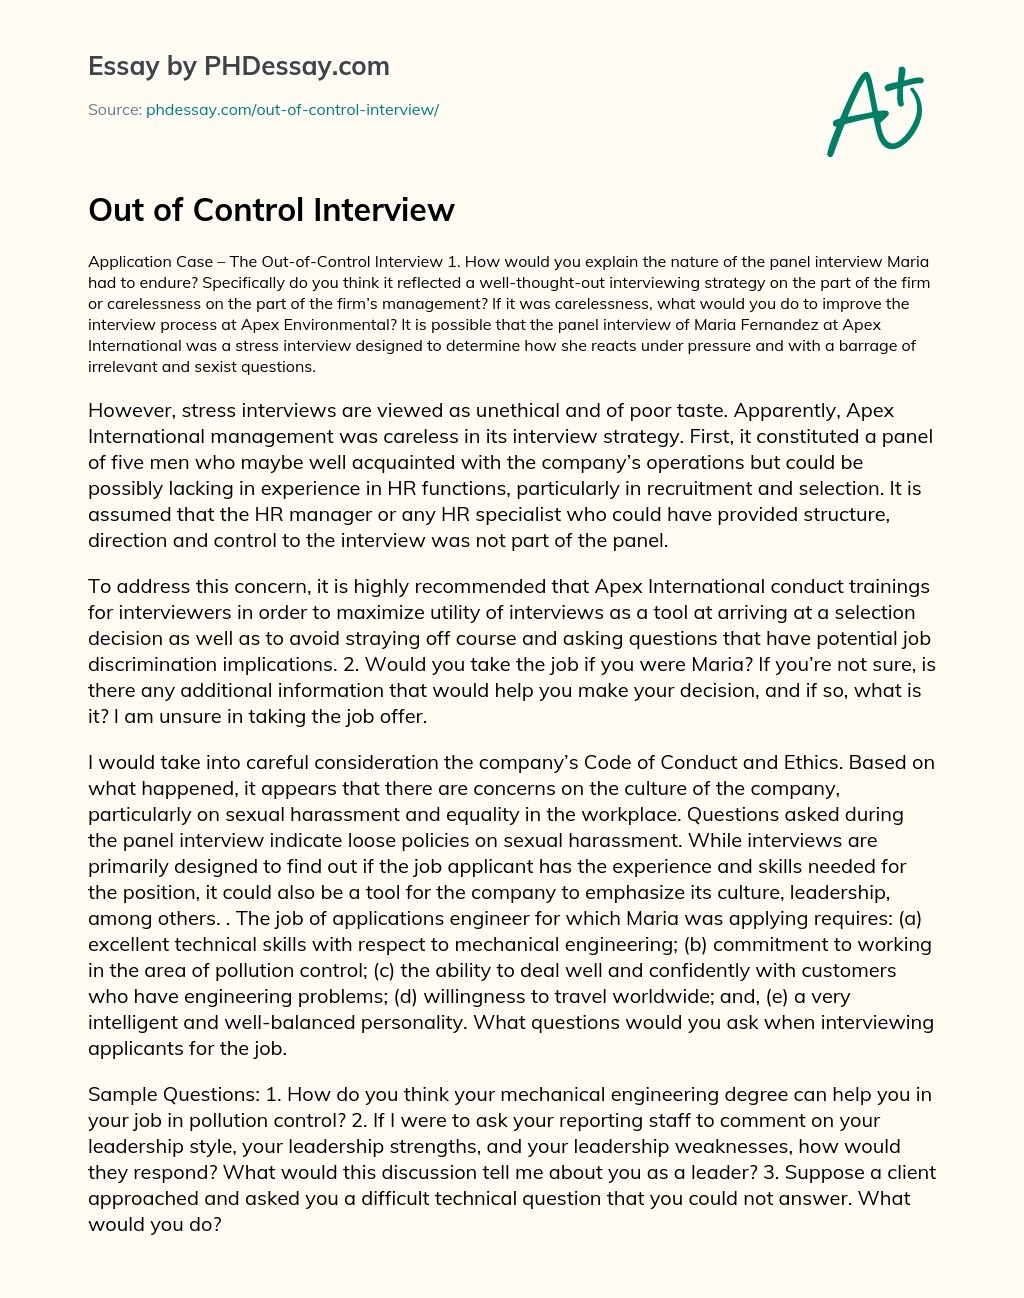 the out of control interview case study